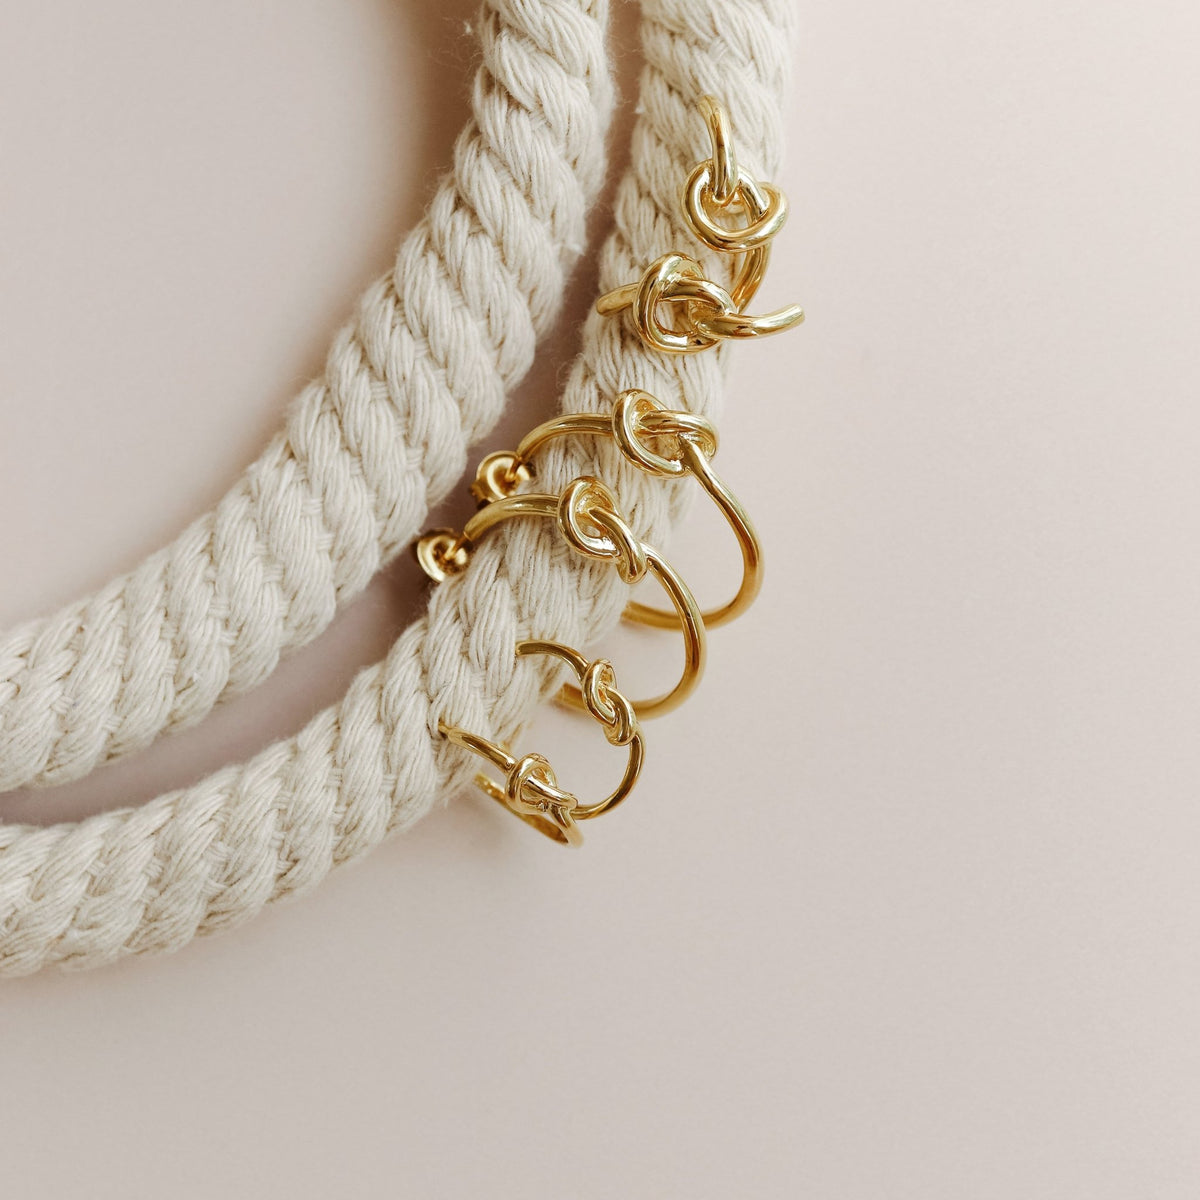 POISE KNOT HUGGIE HOOP - GOLD - SO PRETTY CARA COTTER